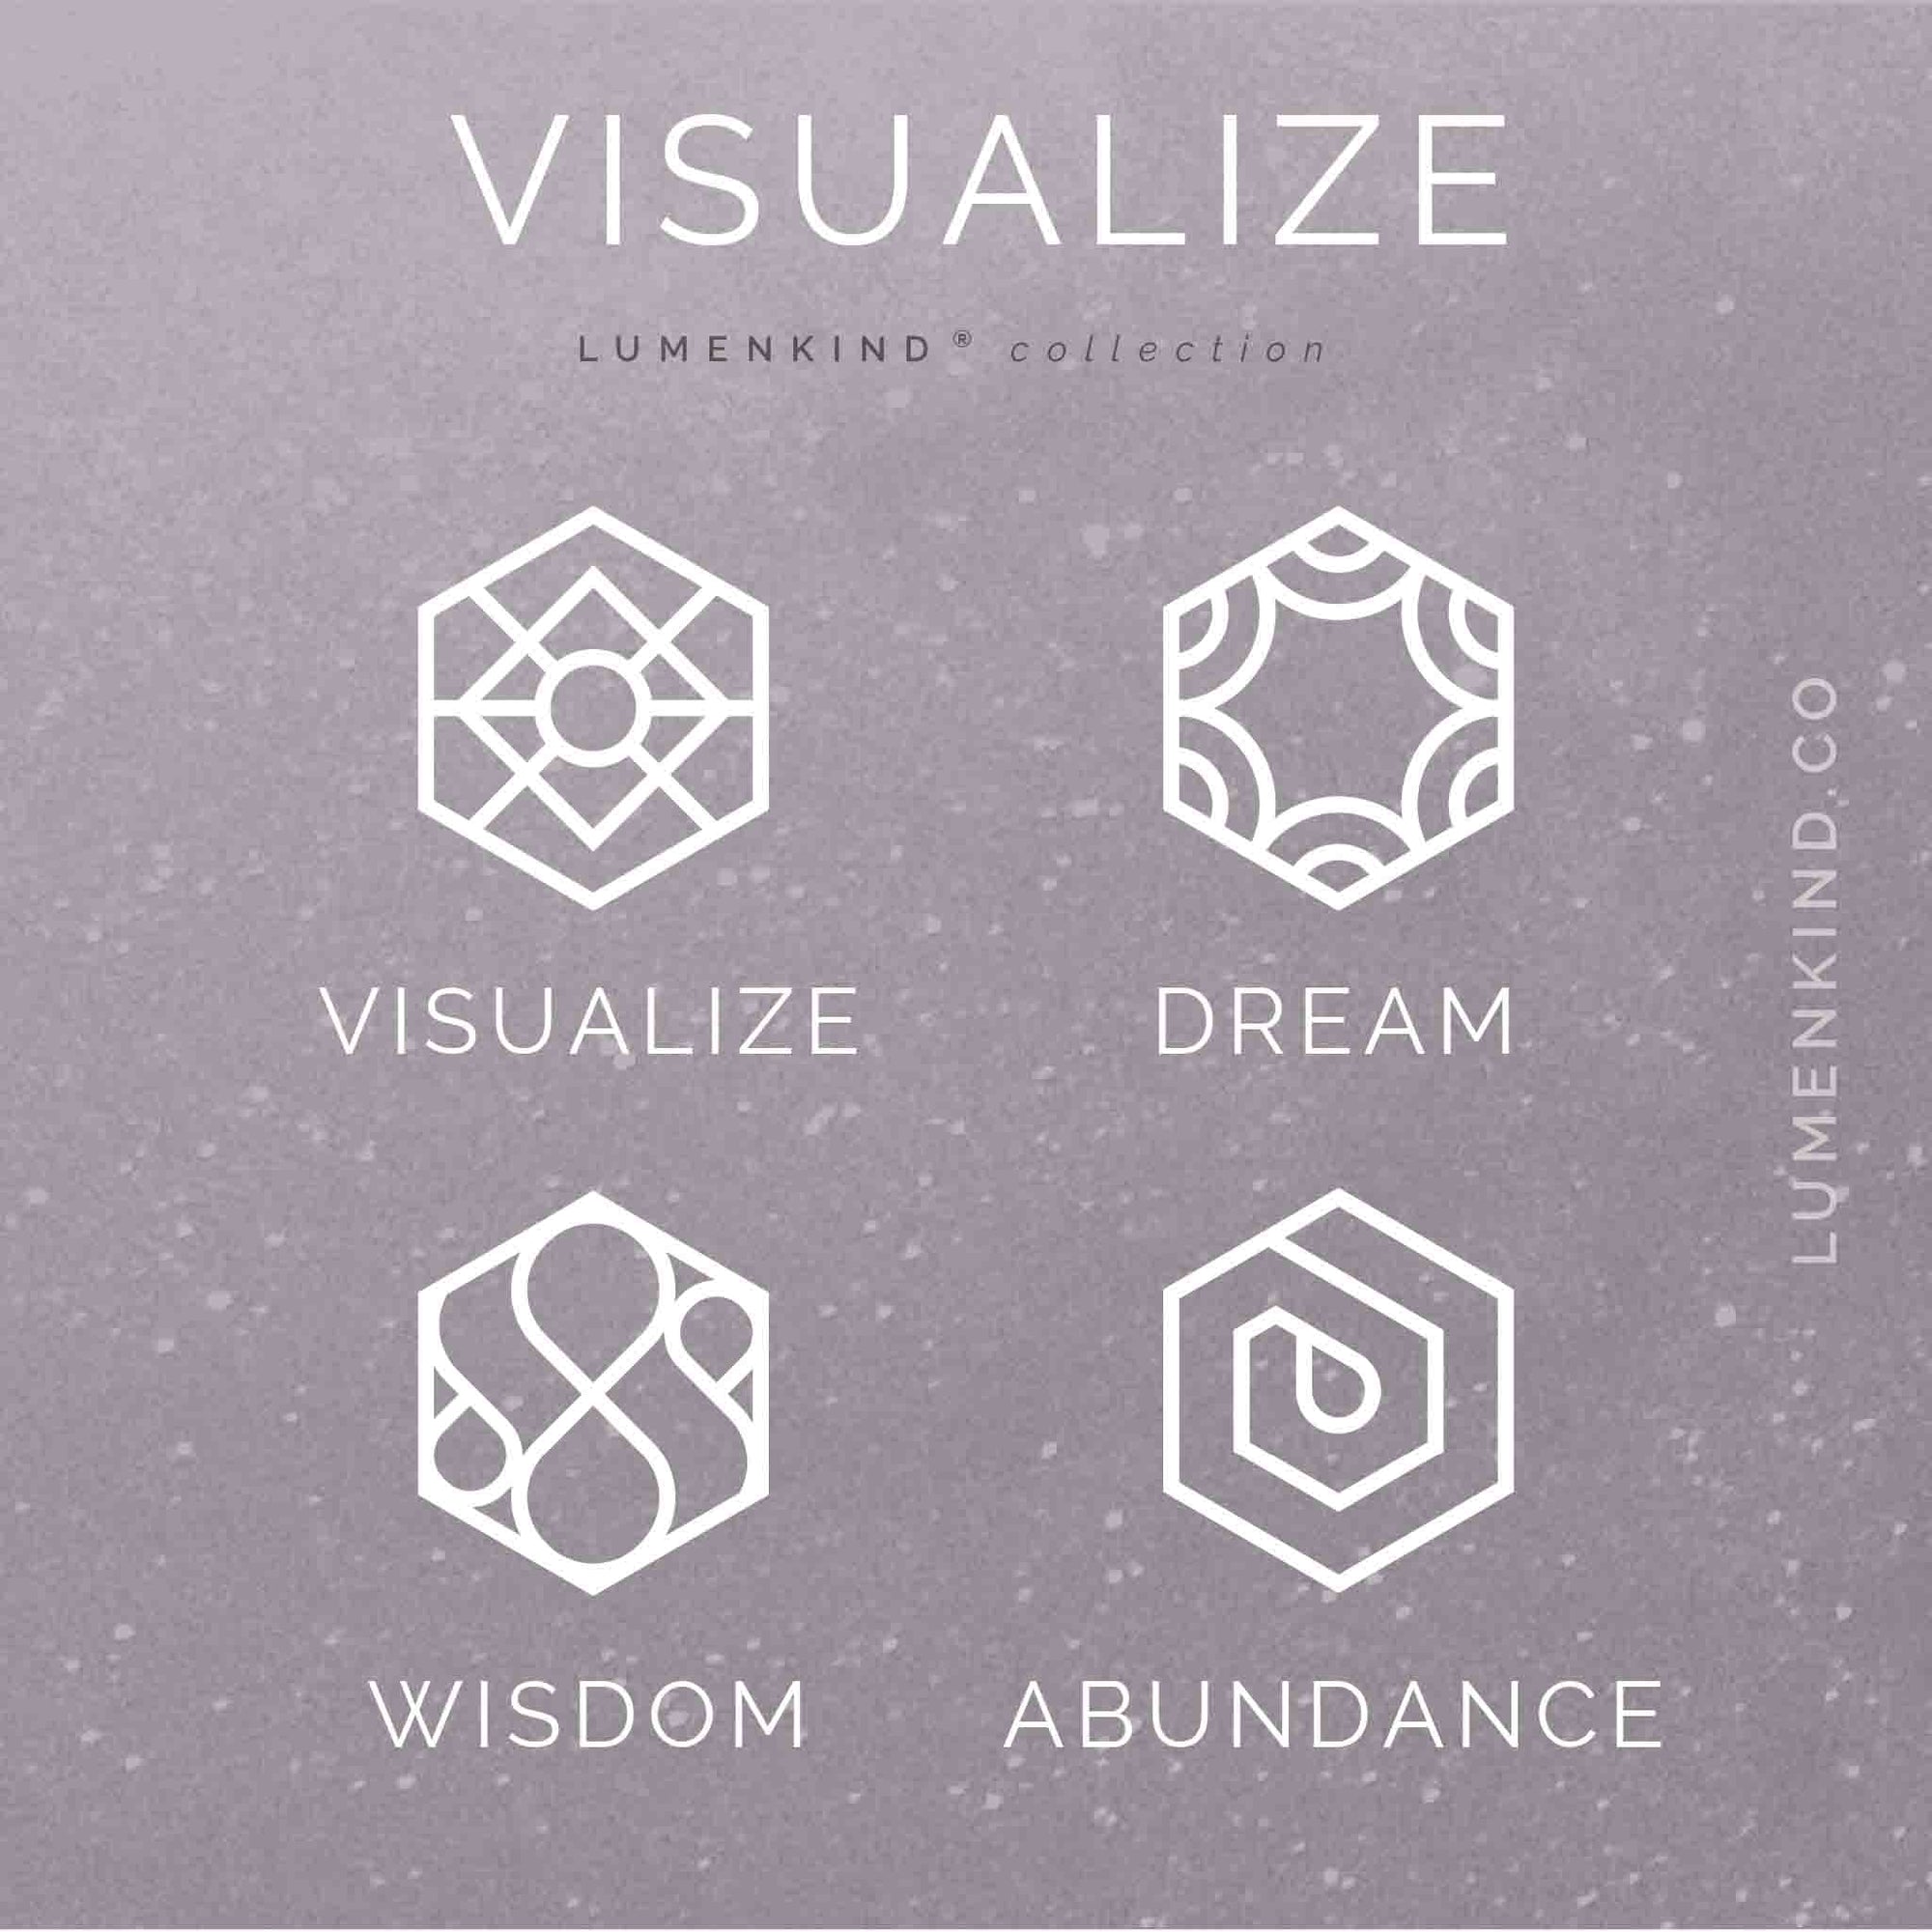 The Visualize Collection of Mindful Marks includes Visualize, Wisdom, Dream, and Abundance.